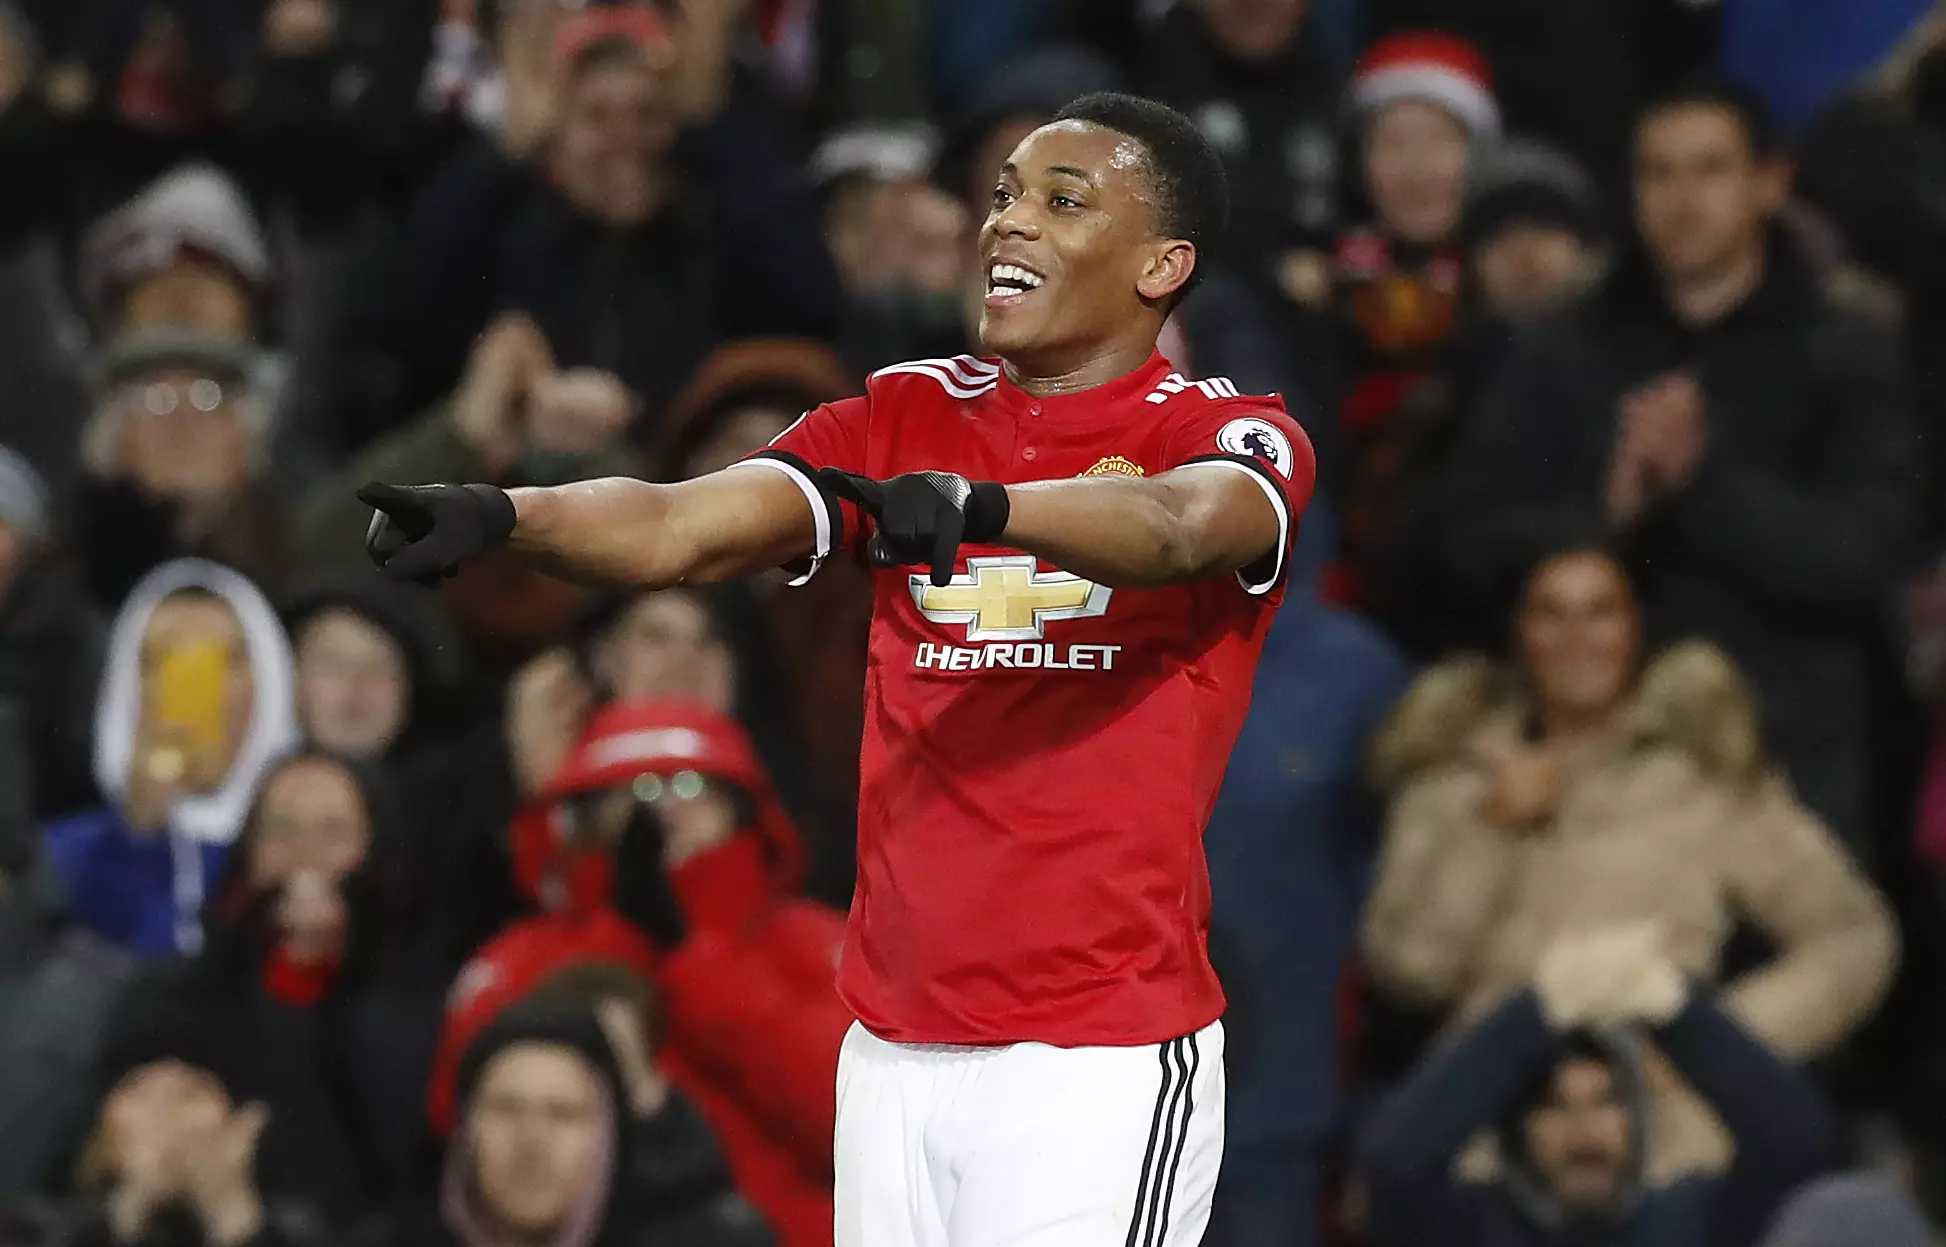 Martial celebrates scoring a goal for United. Image: PA